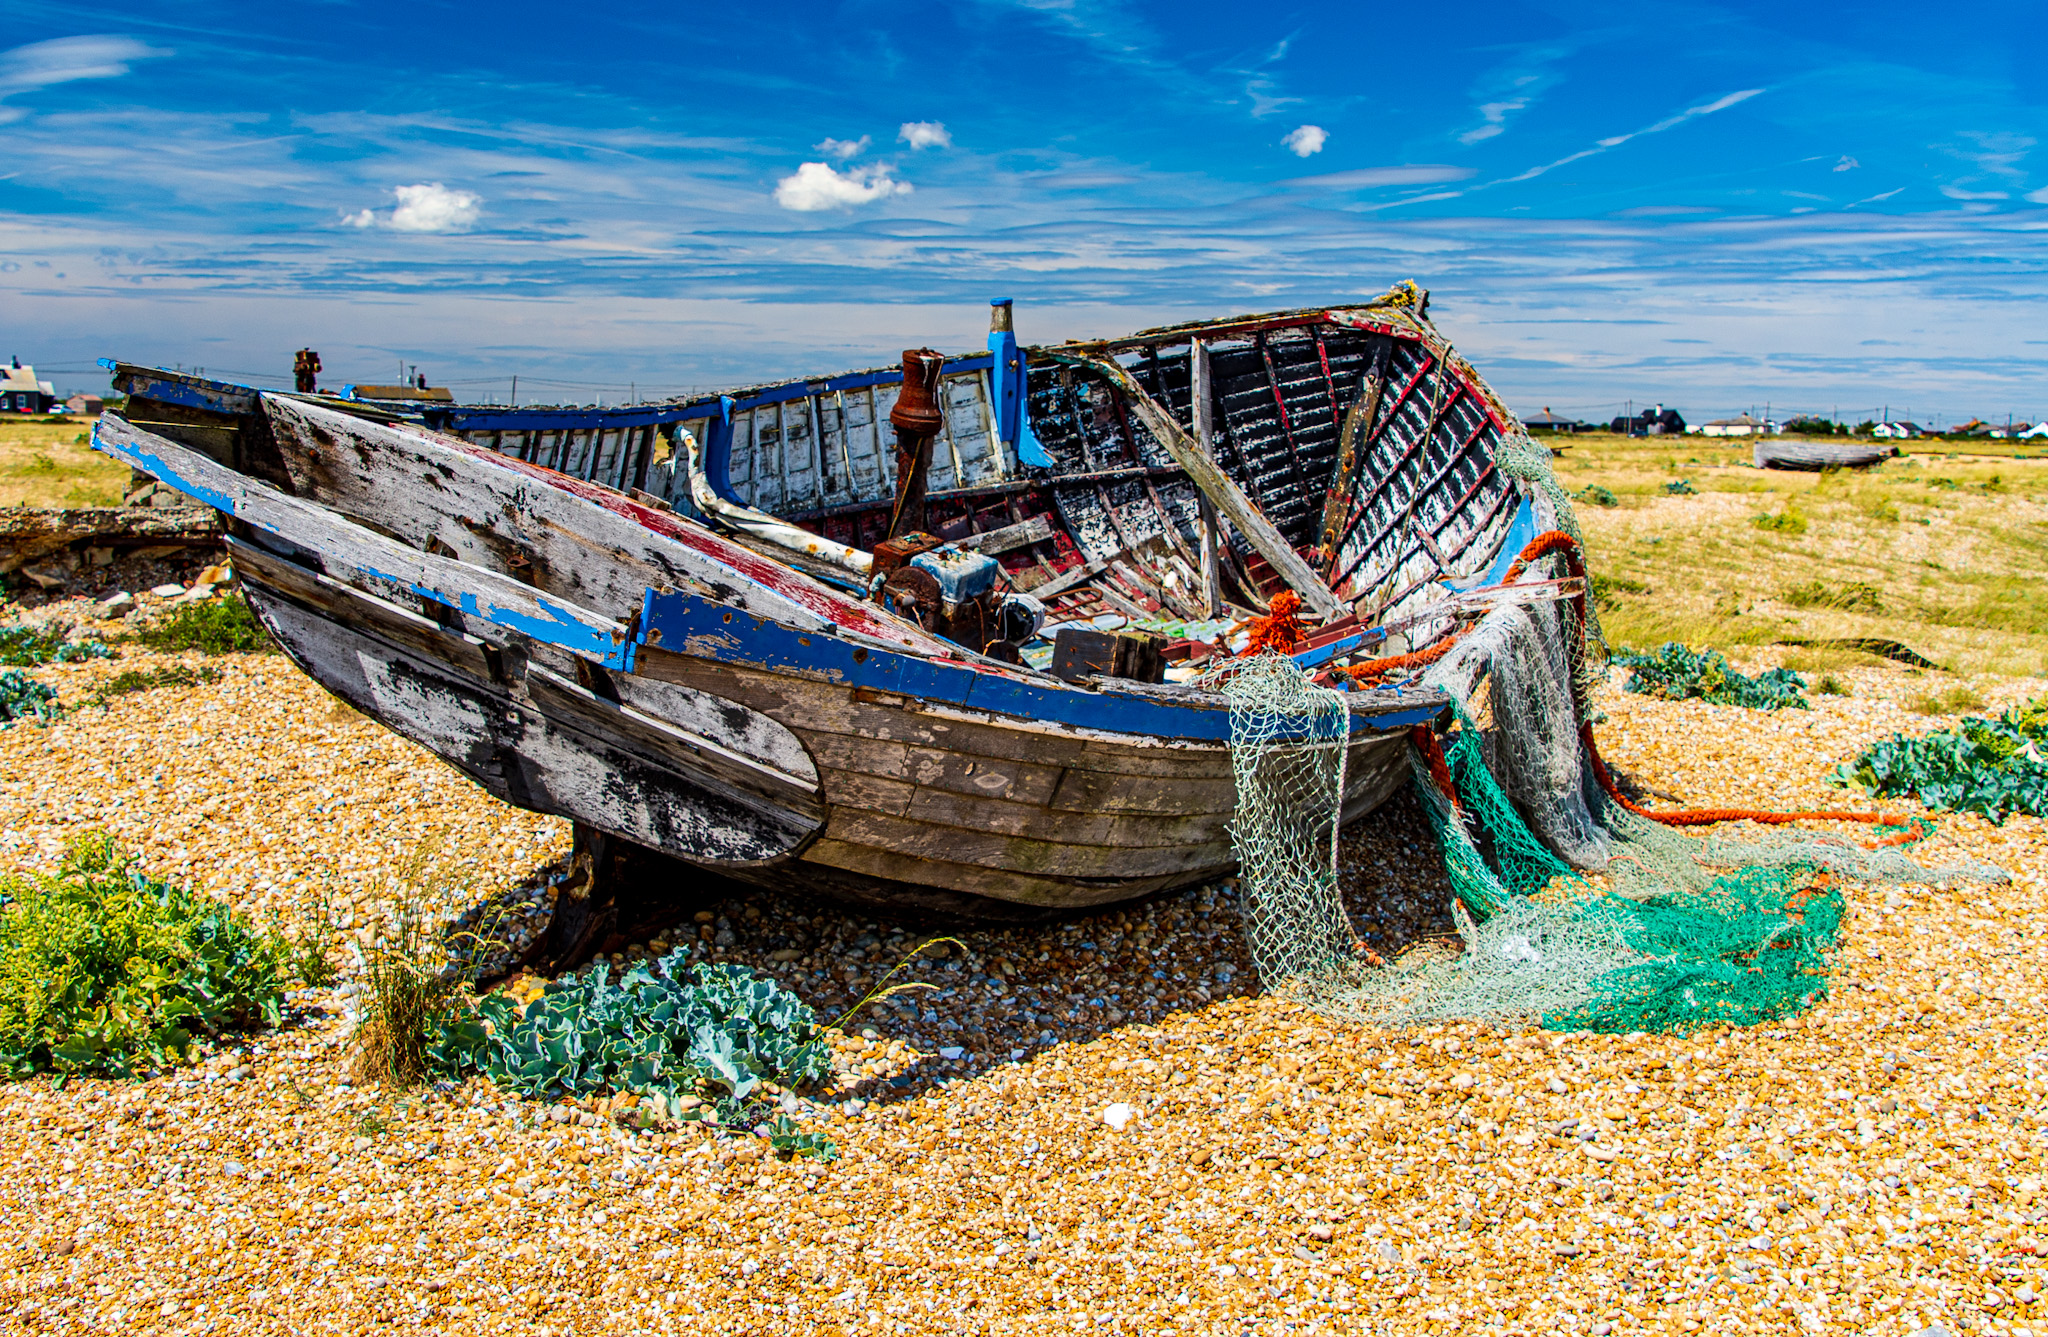 August 2020 Calendar image - Castaway - abandoned on Dungeness Beach by David Stearne